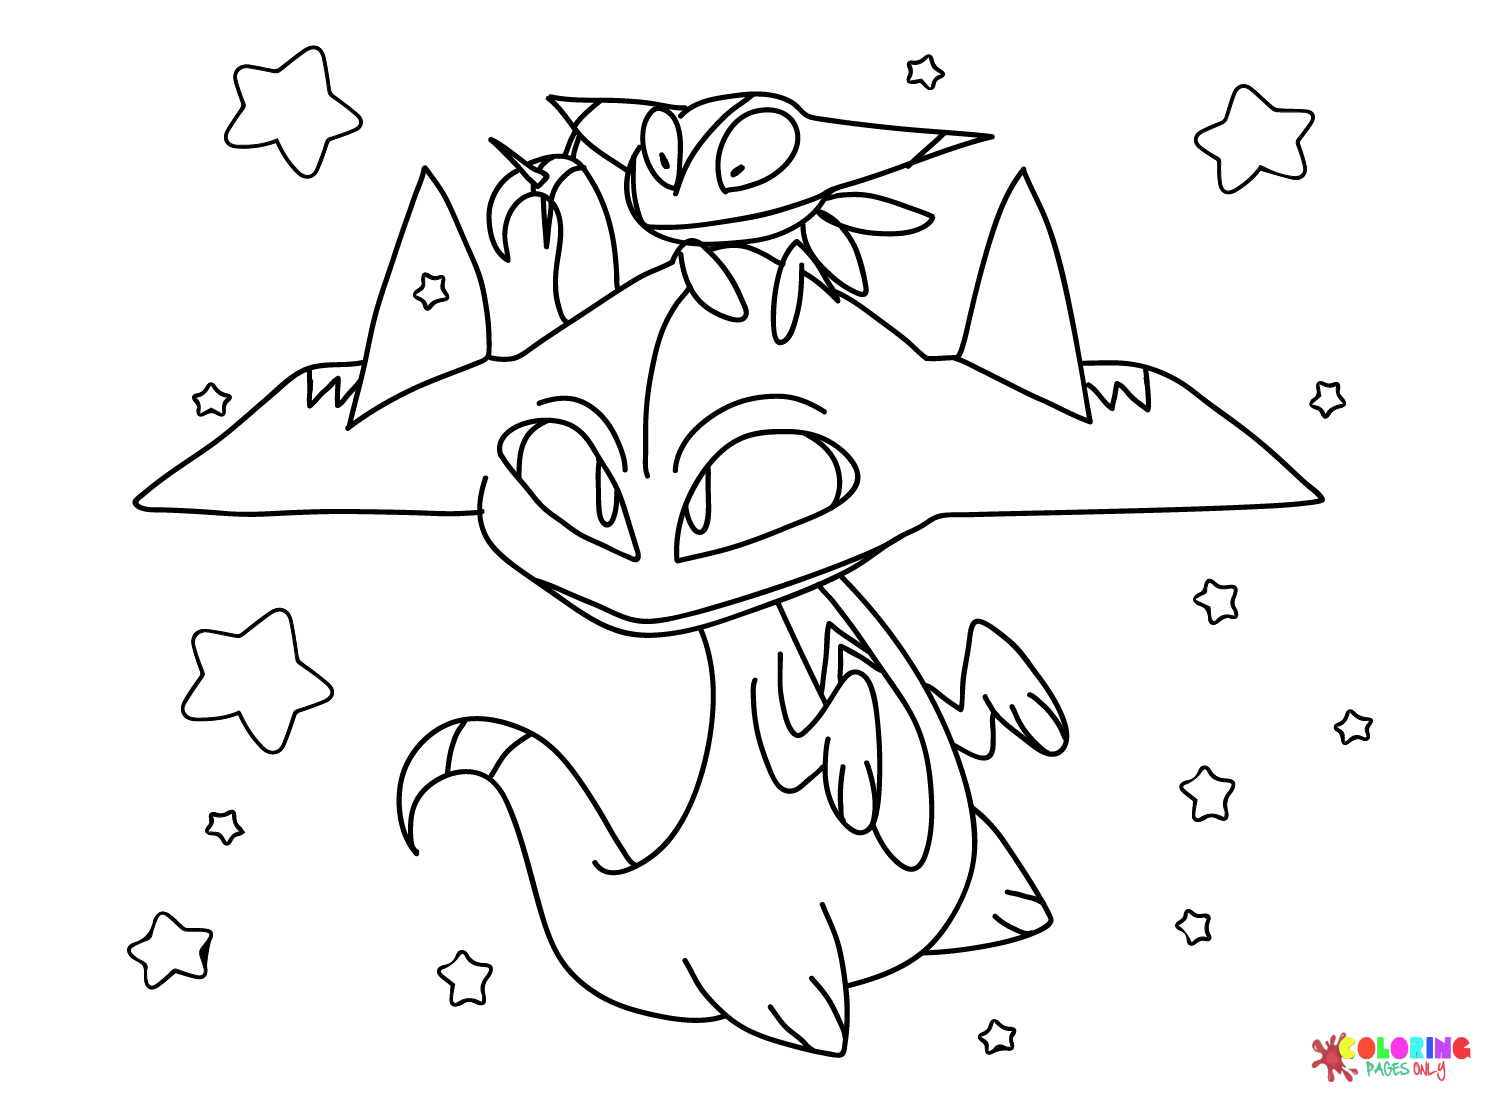 WATER POKEMON coloring pages - 28 Water type Pokemon printables for kids